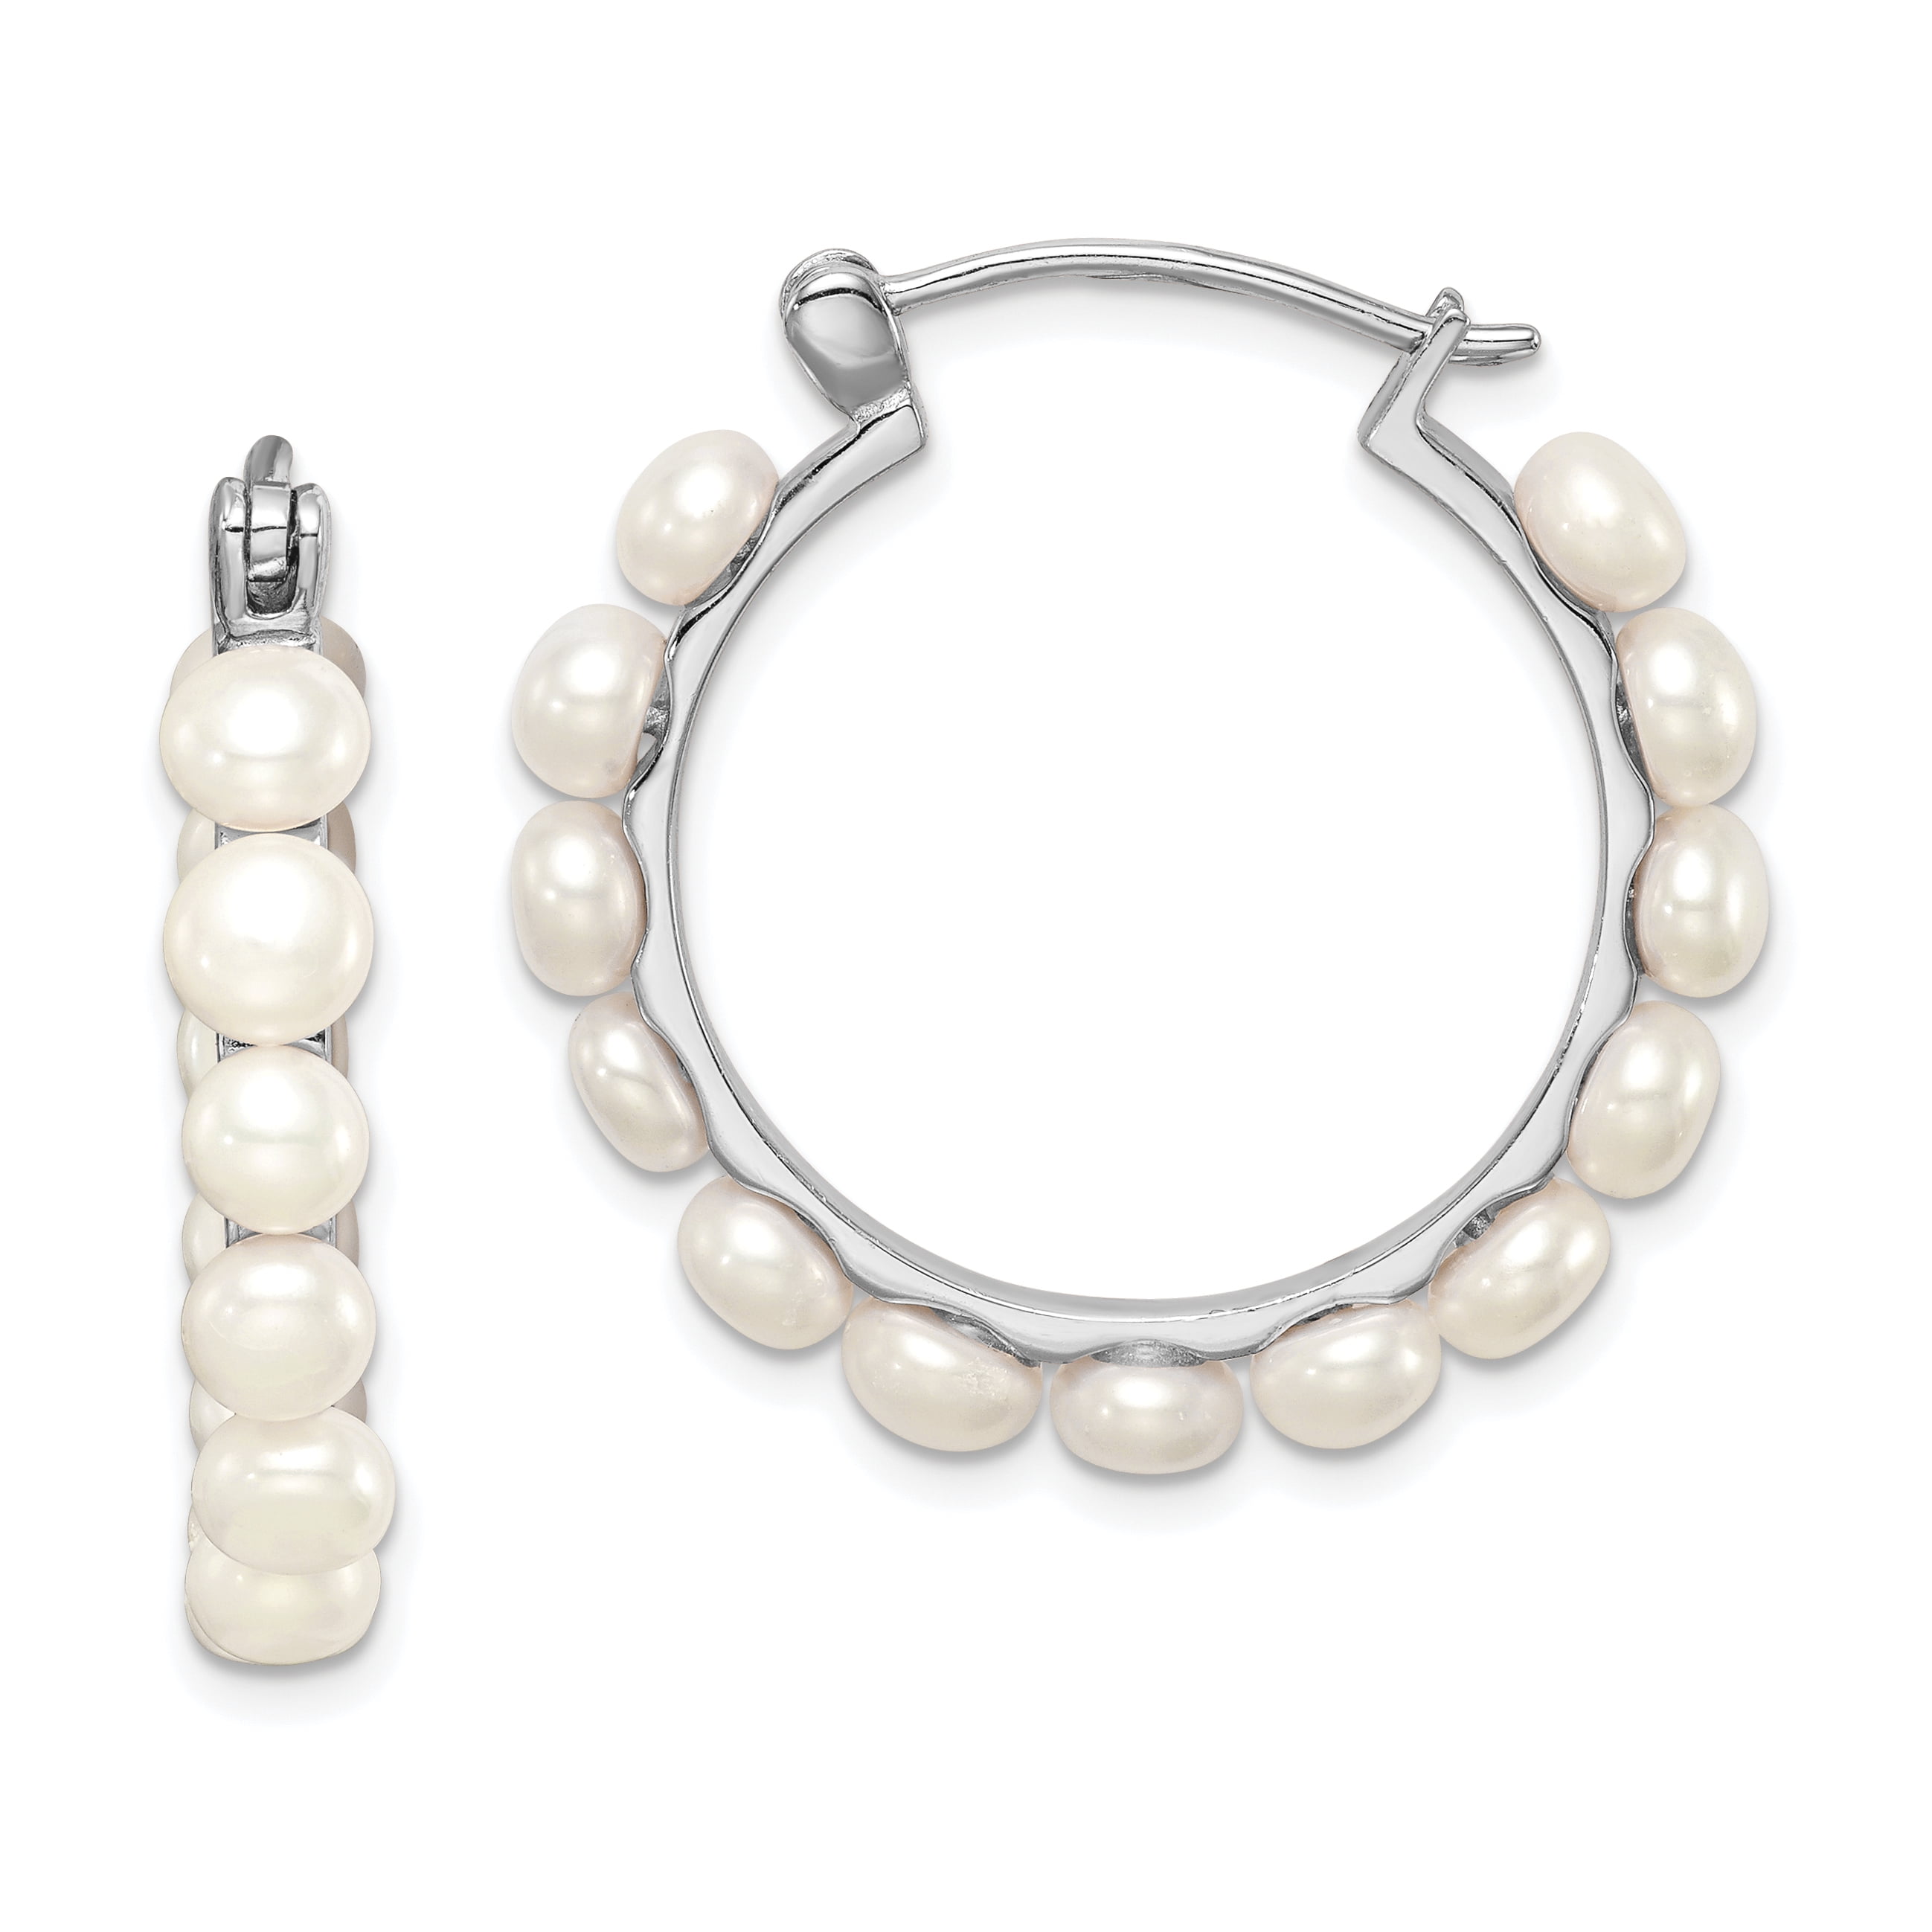 TOUS Super Power 925 Silver Bracelet with 3-3.5mm Chinese Freshwater Cultured Pearls